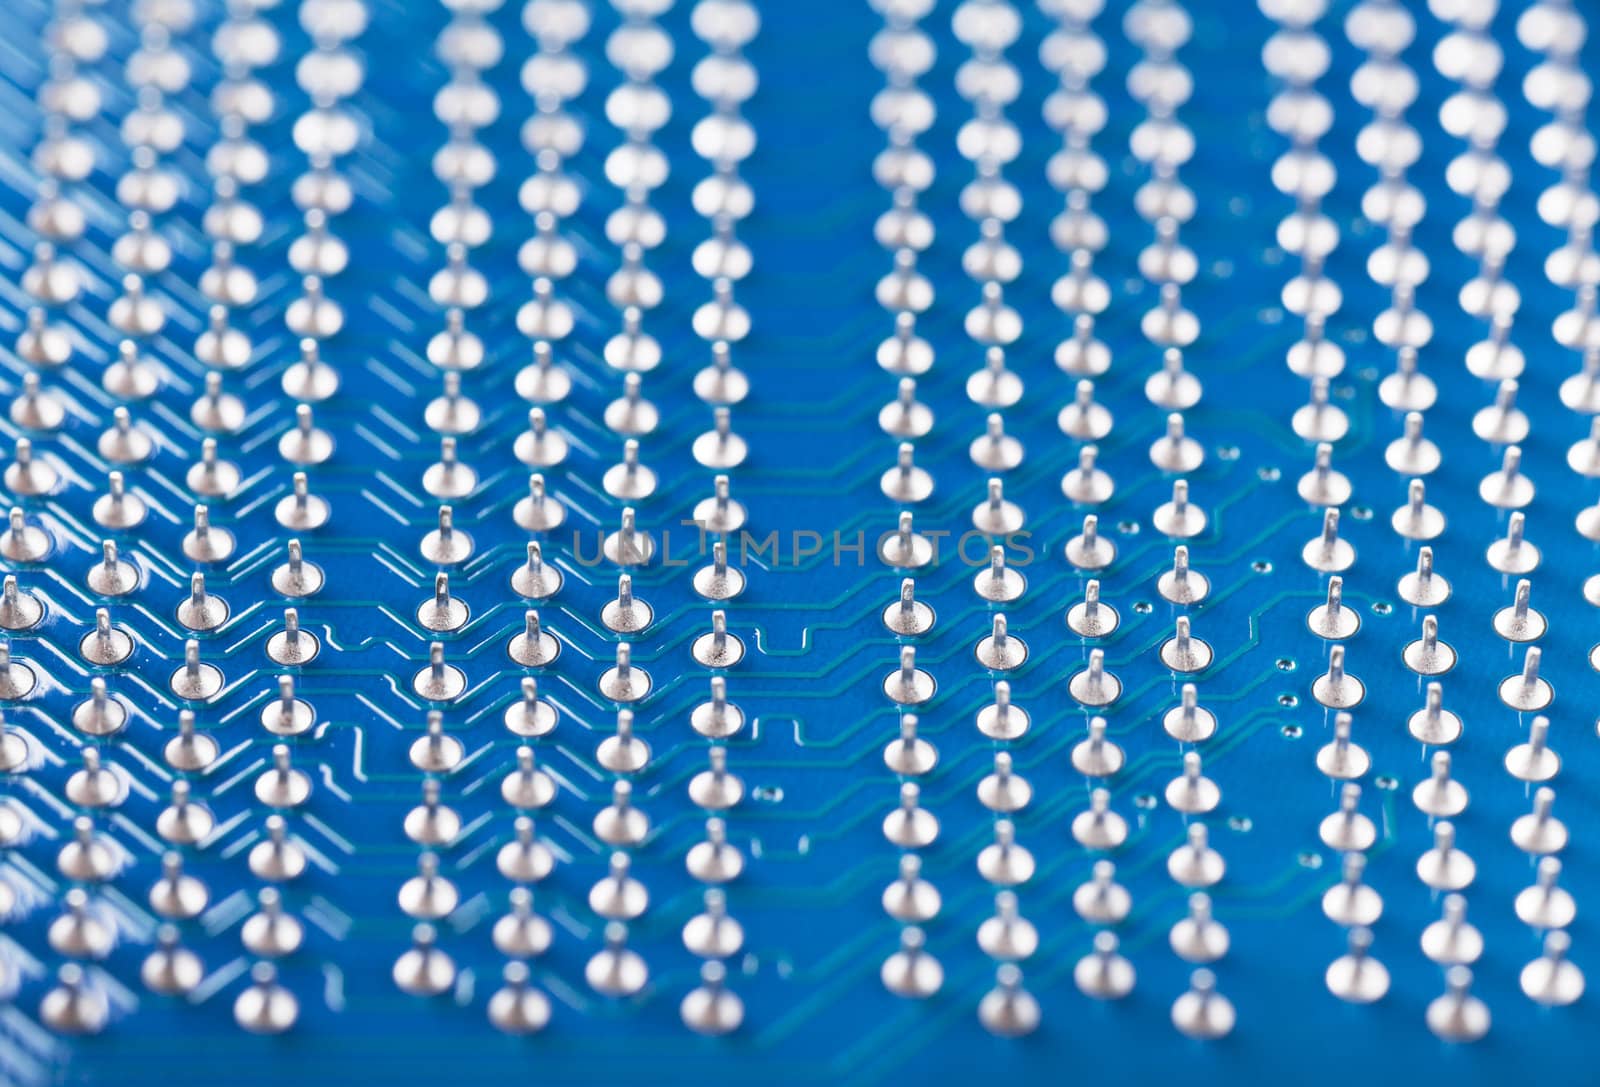 Printed circuit board by AGorohov